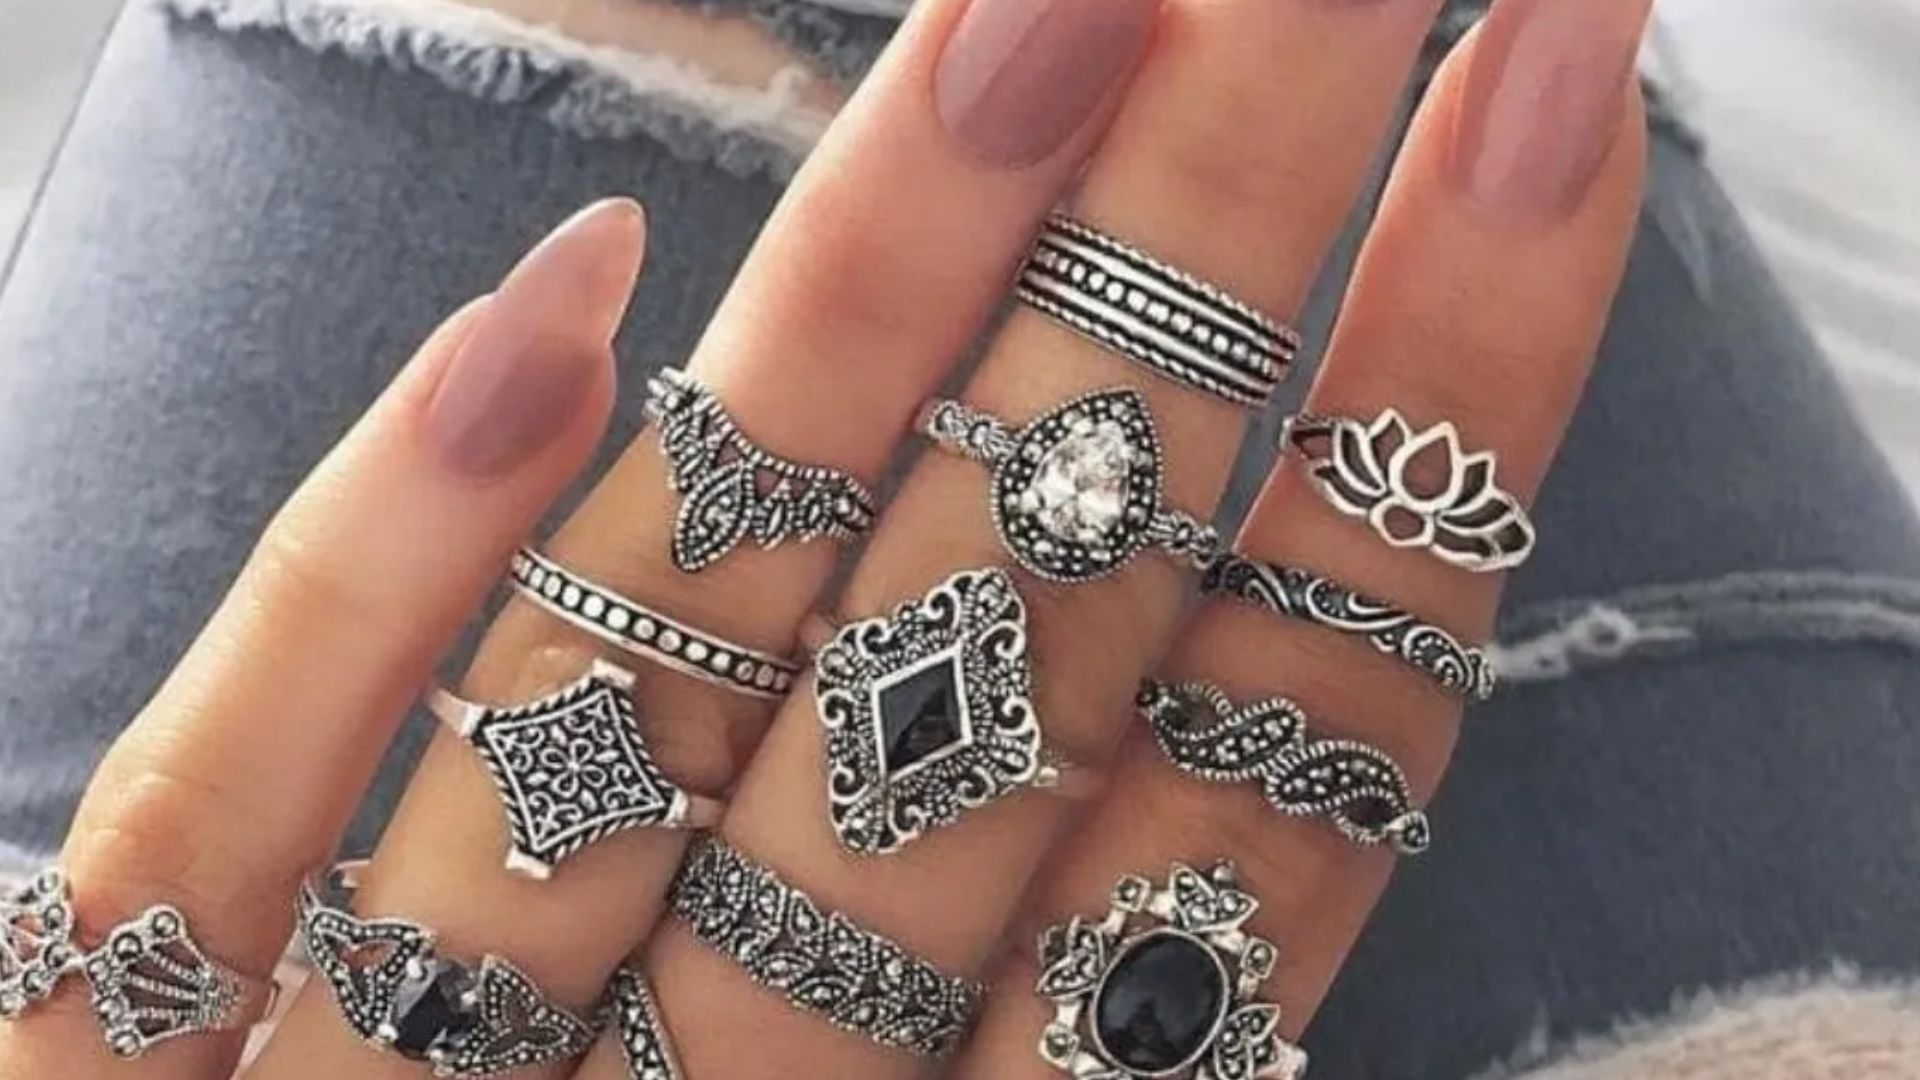 Person Wearing Too Many Rings On Hand